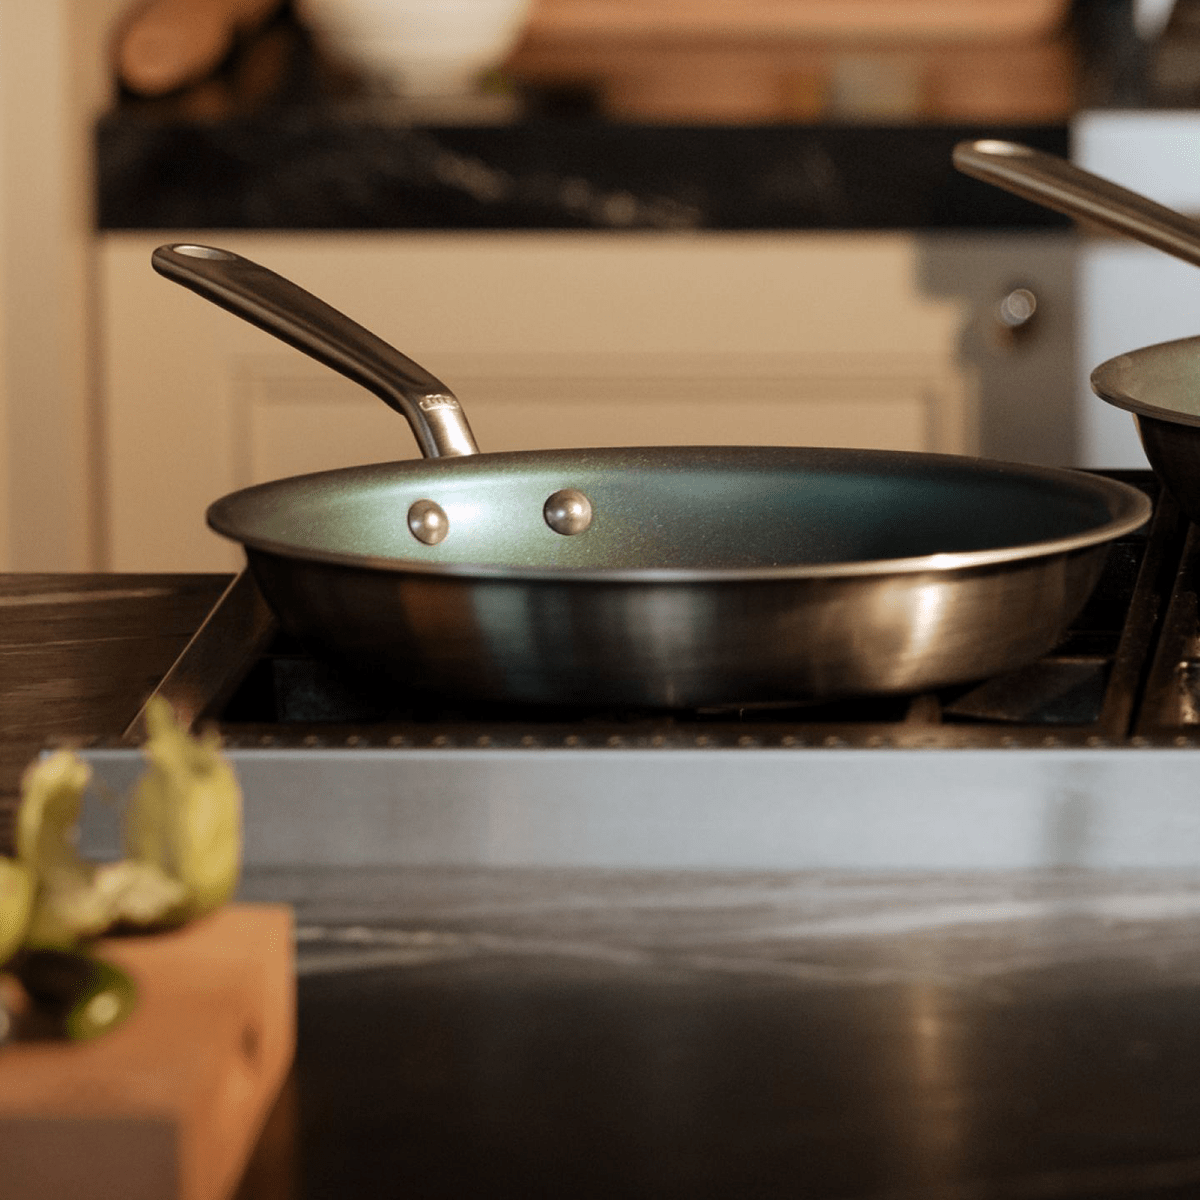 https://www.tasteofhome.com/wp-content/uploads/2023/05/made-in-non-stick-frying-pan-via-madeincookware.com-ecomm.png?fit=700%2C700